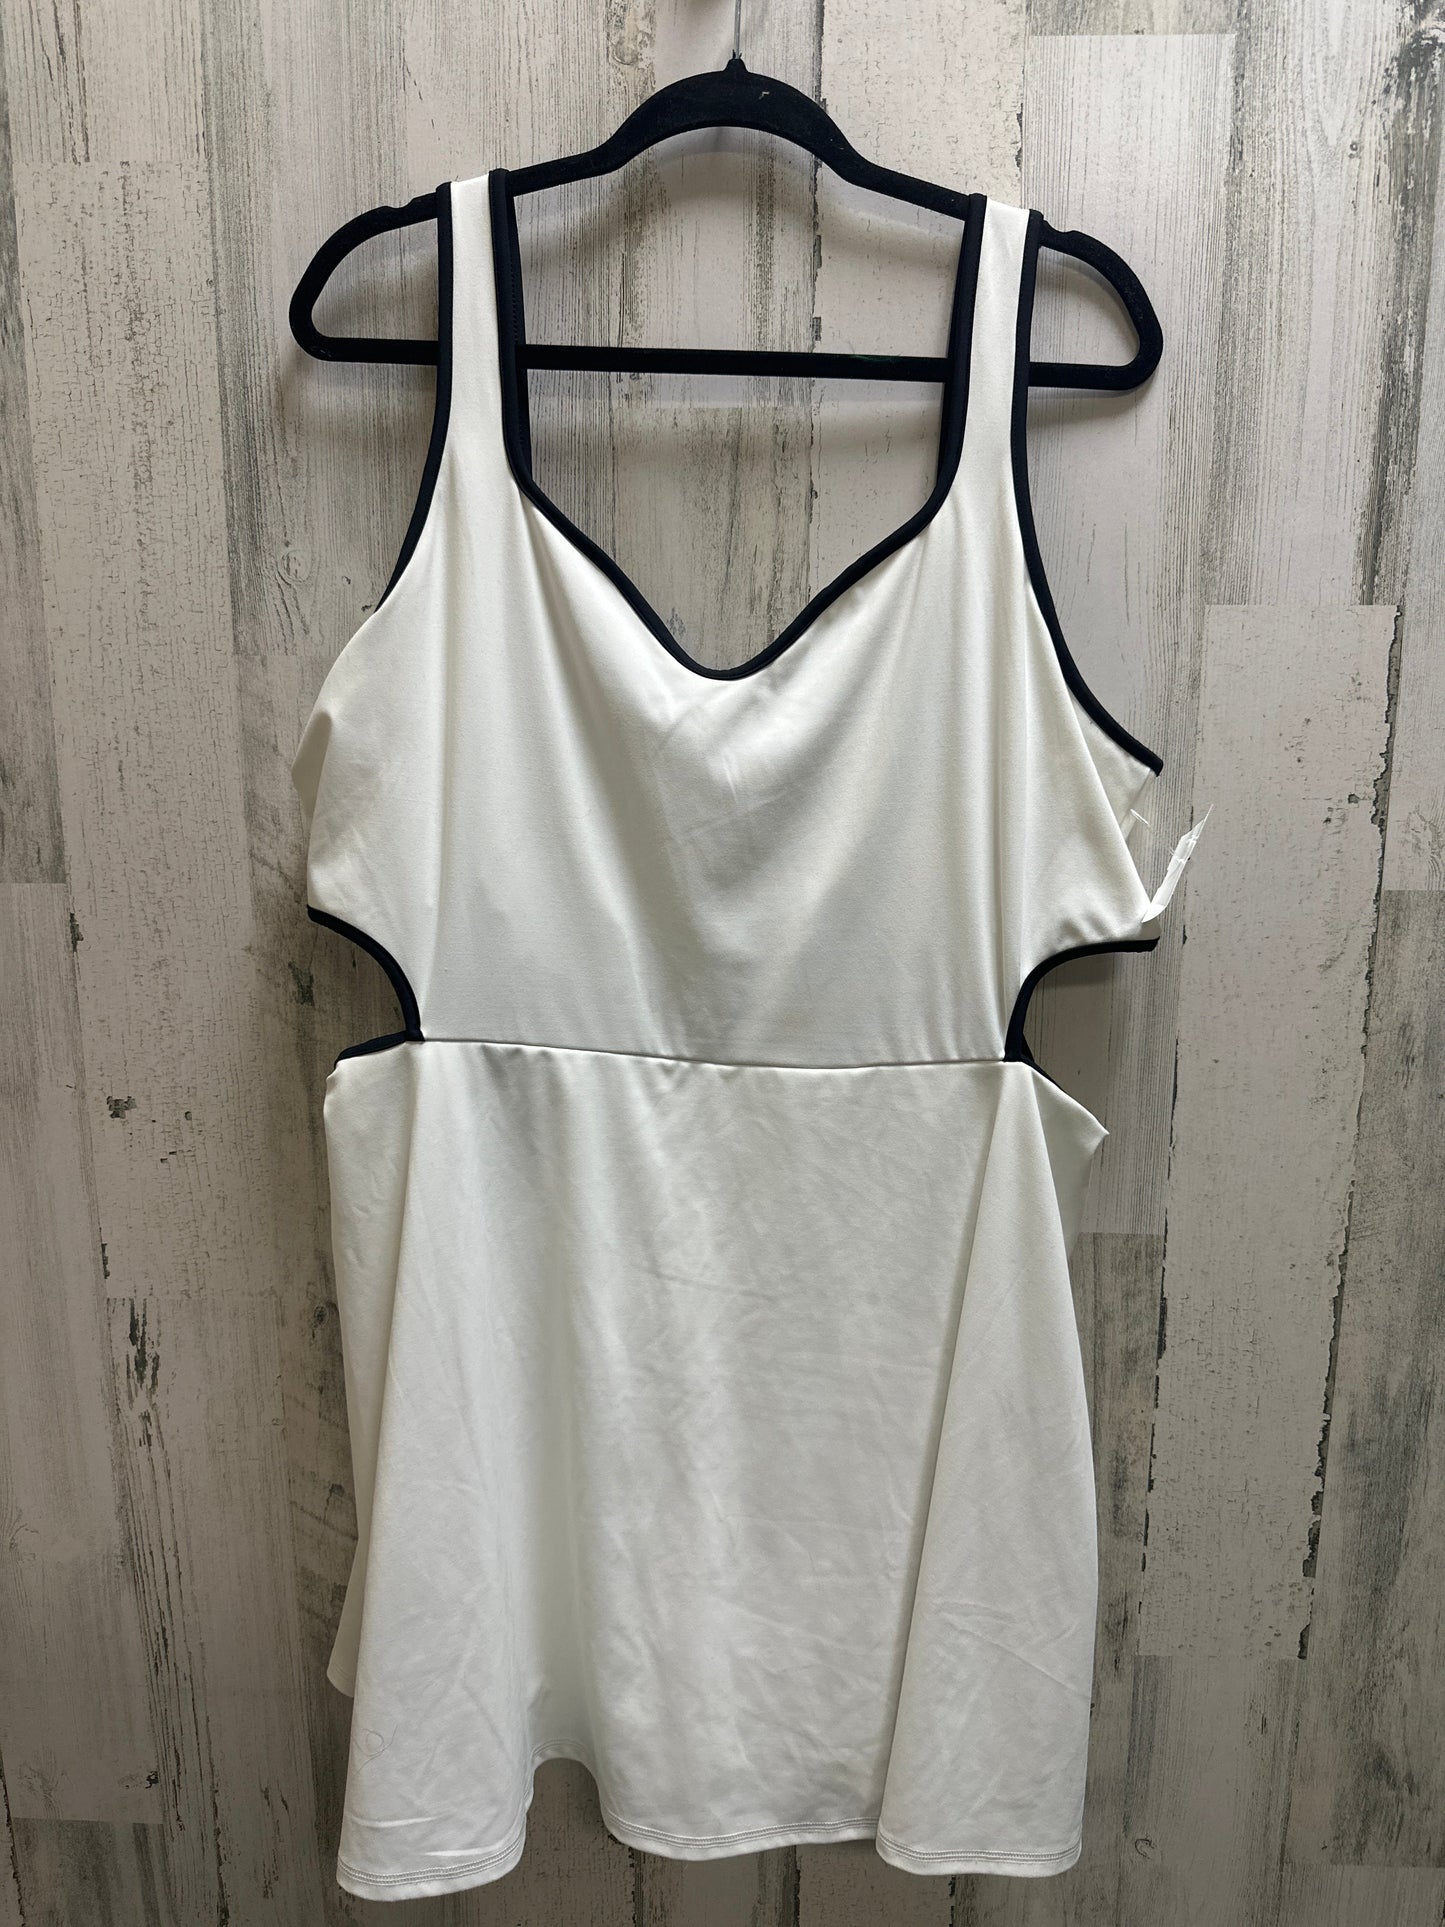 White Athletic Dress Old Navy, Size 2x